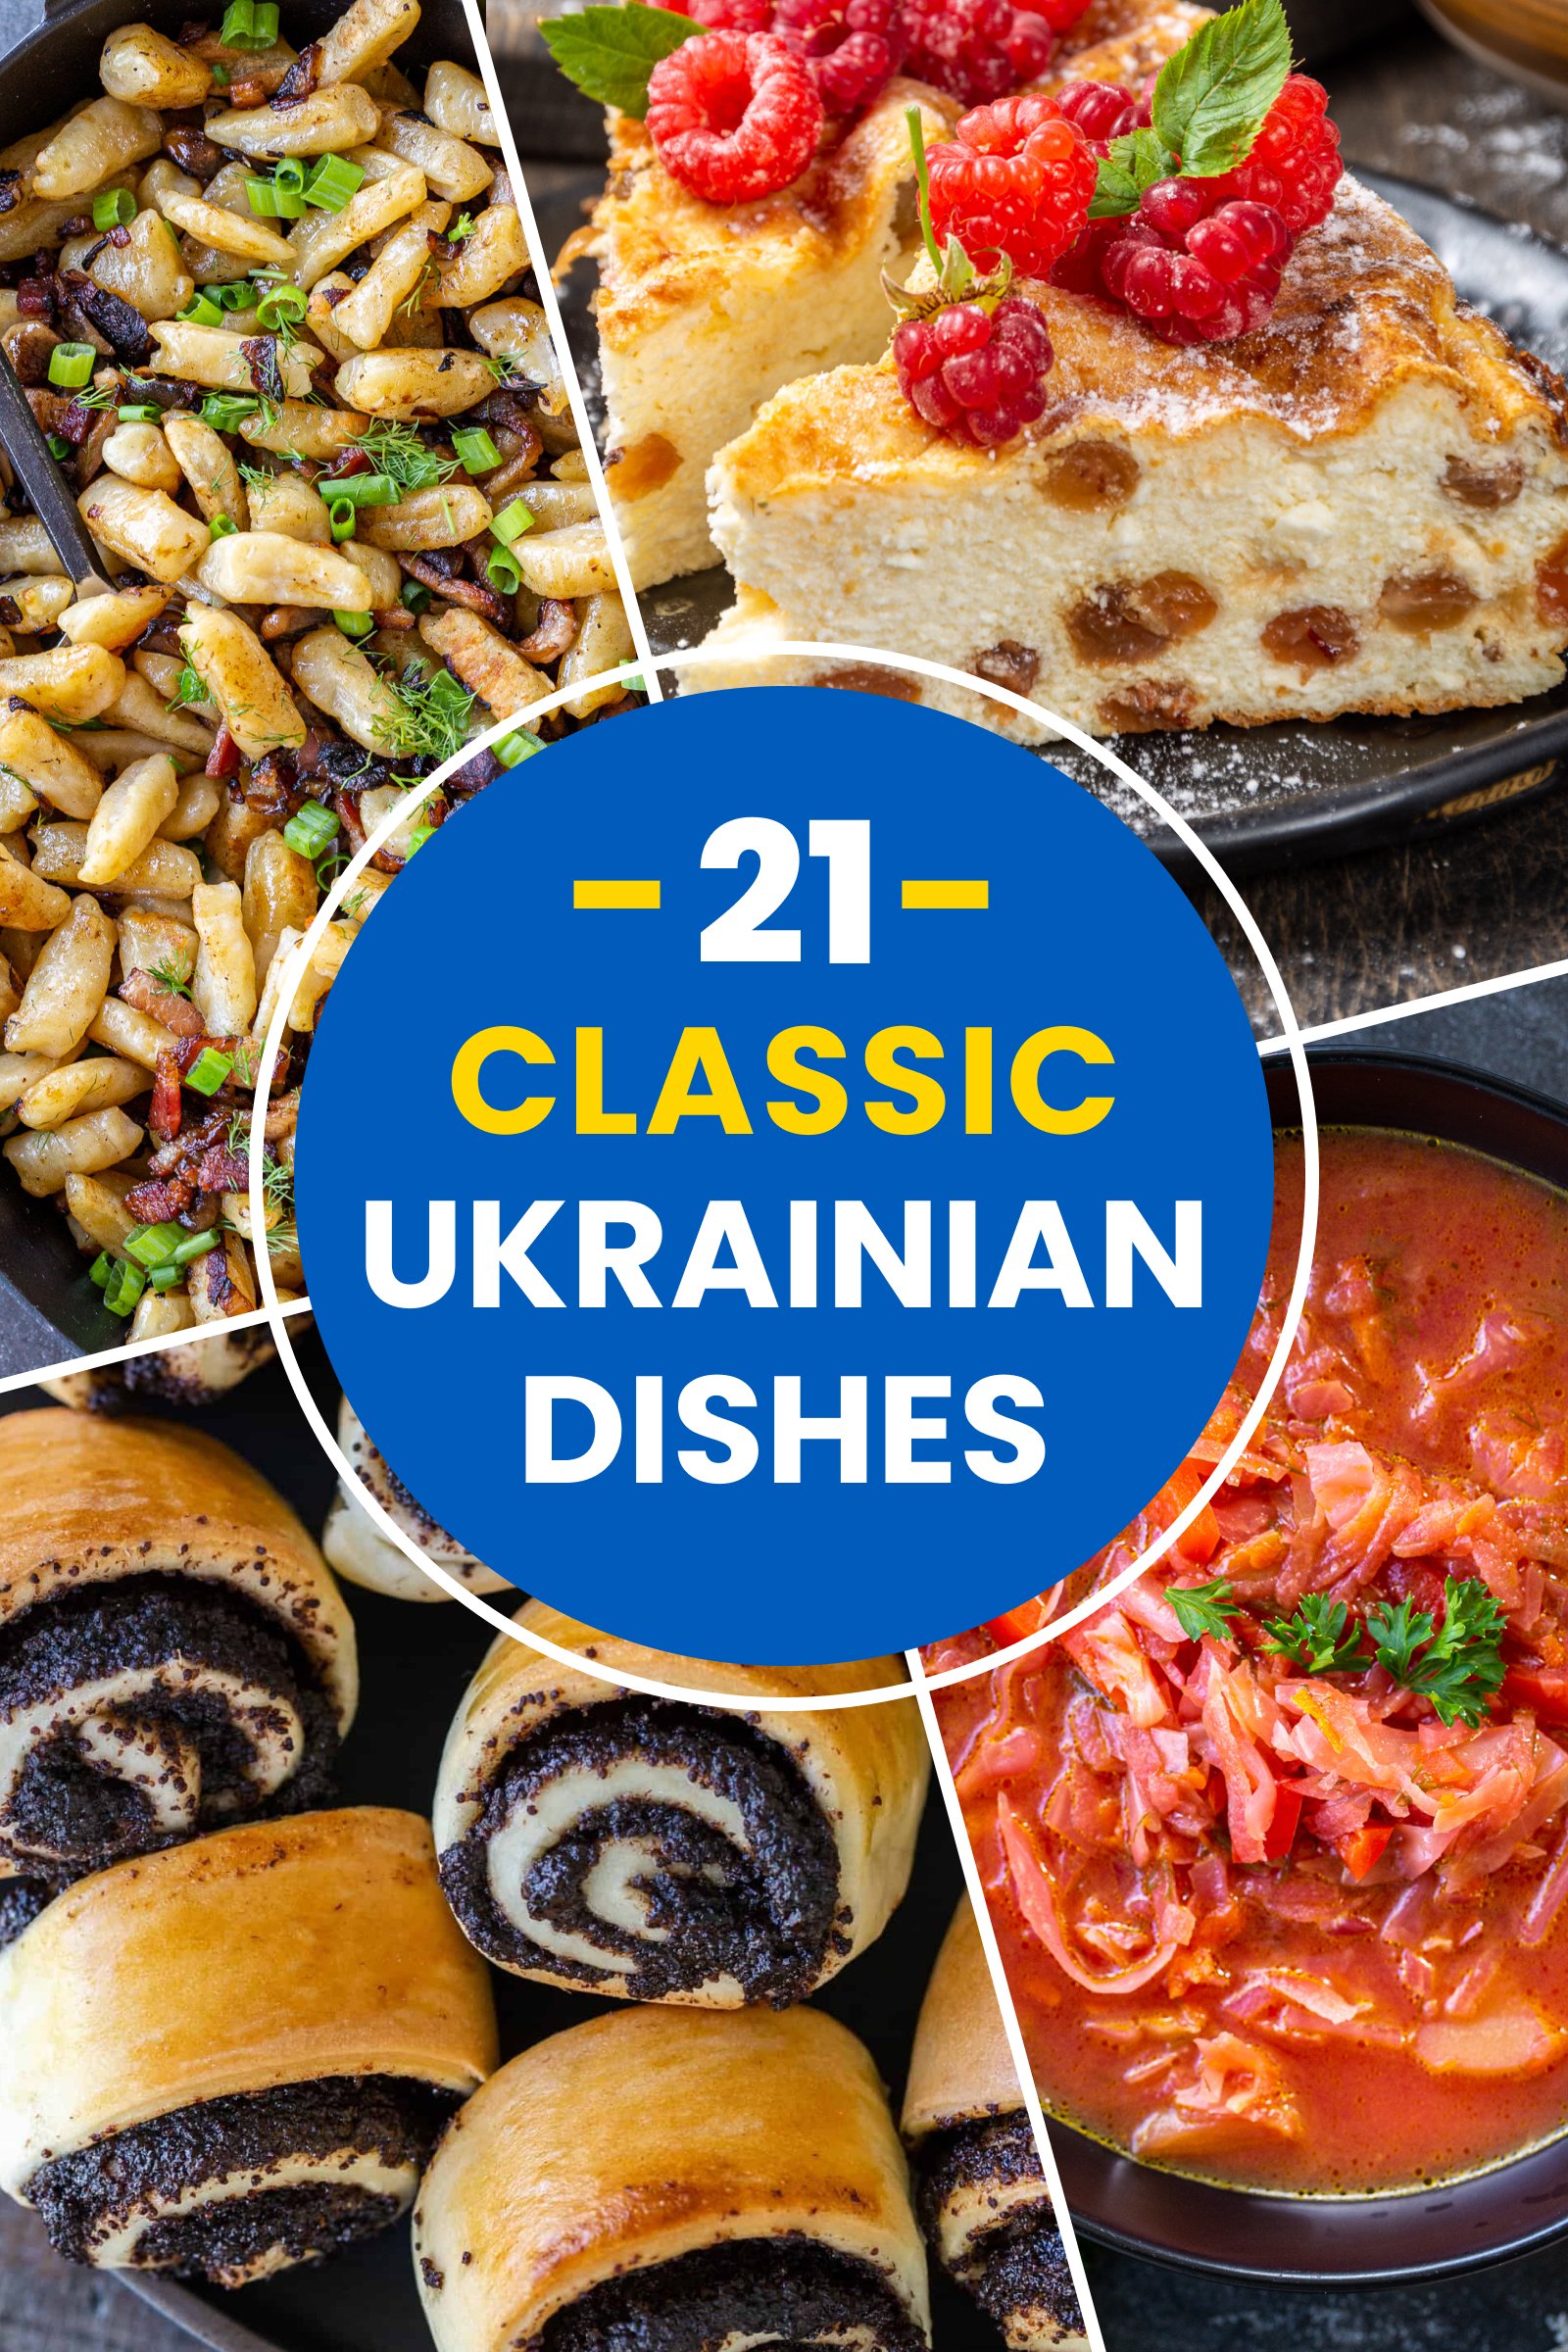 20 Traditional Russian Breakfast Foods - Insanely Good